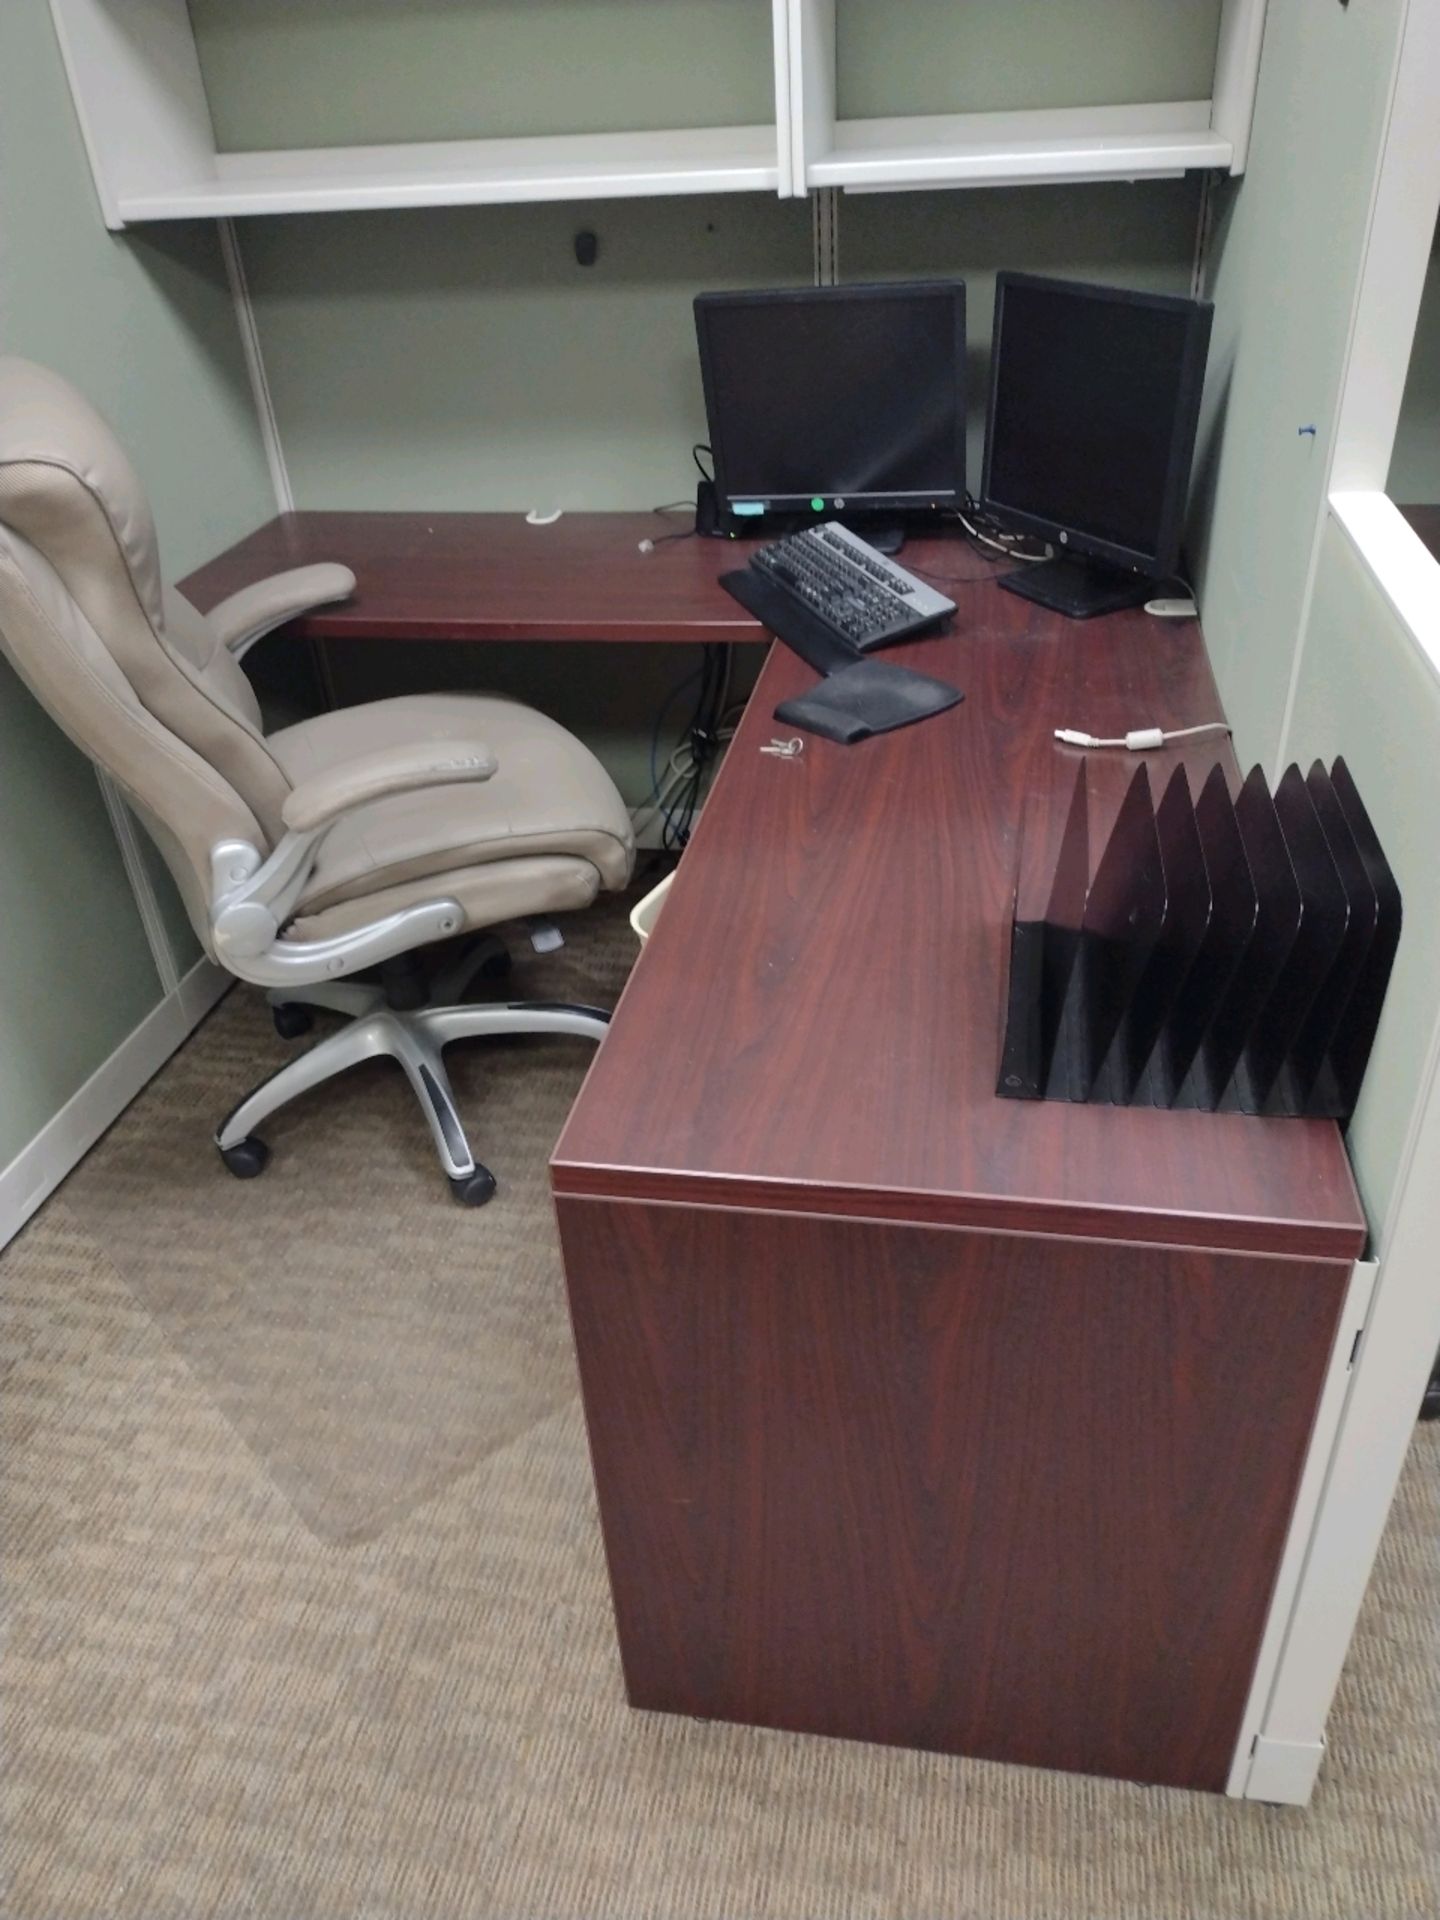 OFFICE SUITE TO INCLUDE: 8 WORK STATION MODULAR CUBICLE SYSTEM WITH CHAIRS, PRINTERS, MONITORS, - Image 5 of 16